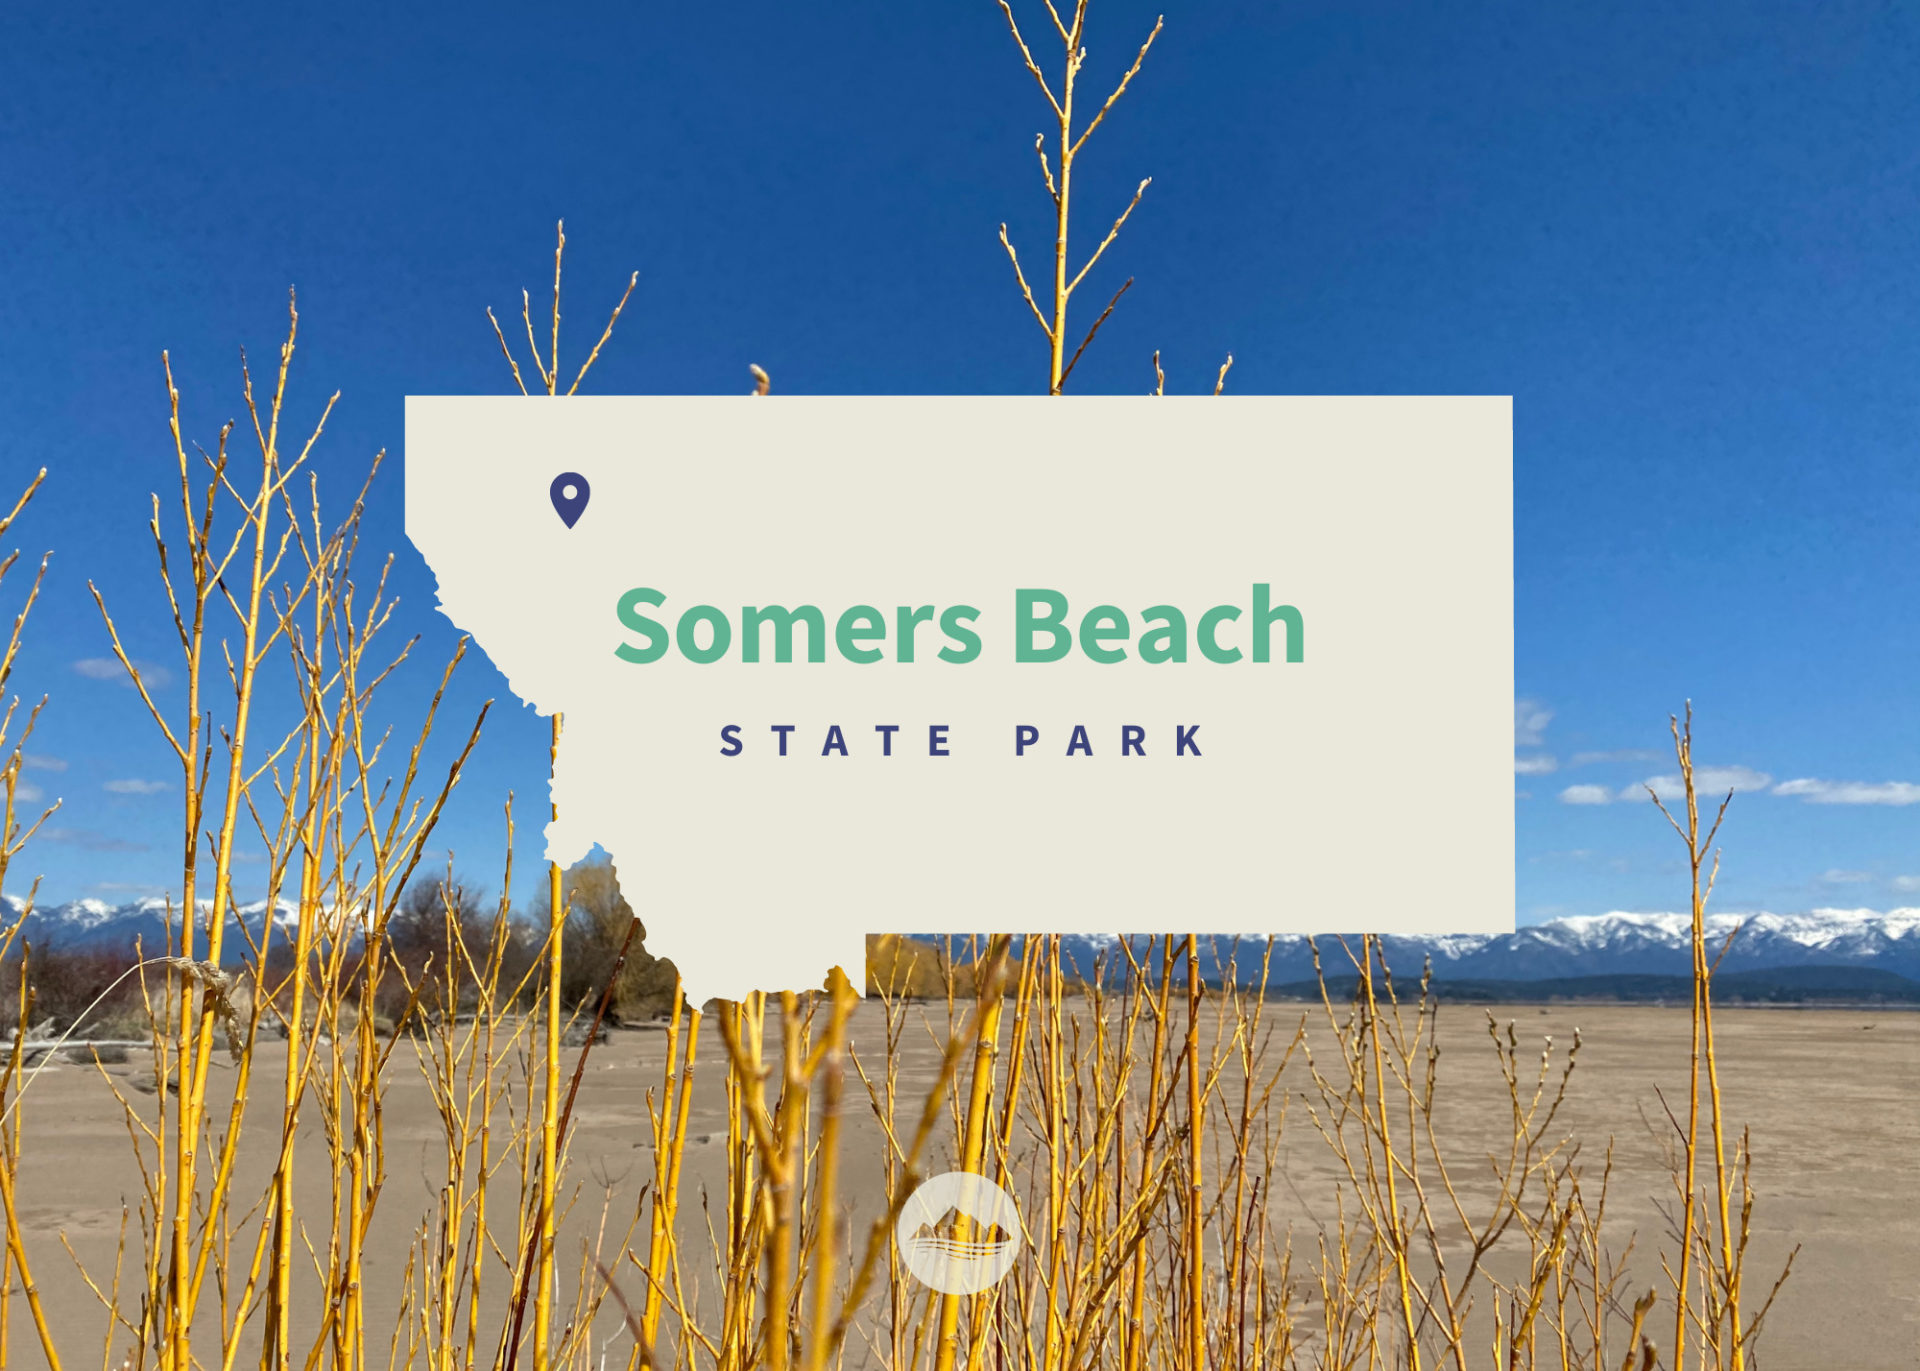 Somers Beach State Park